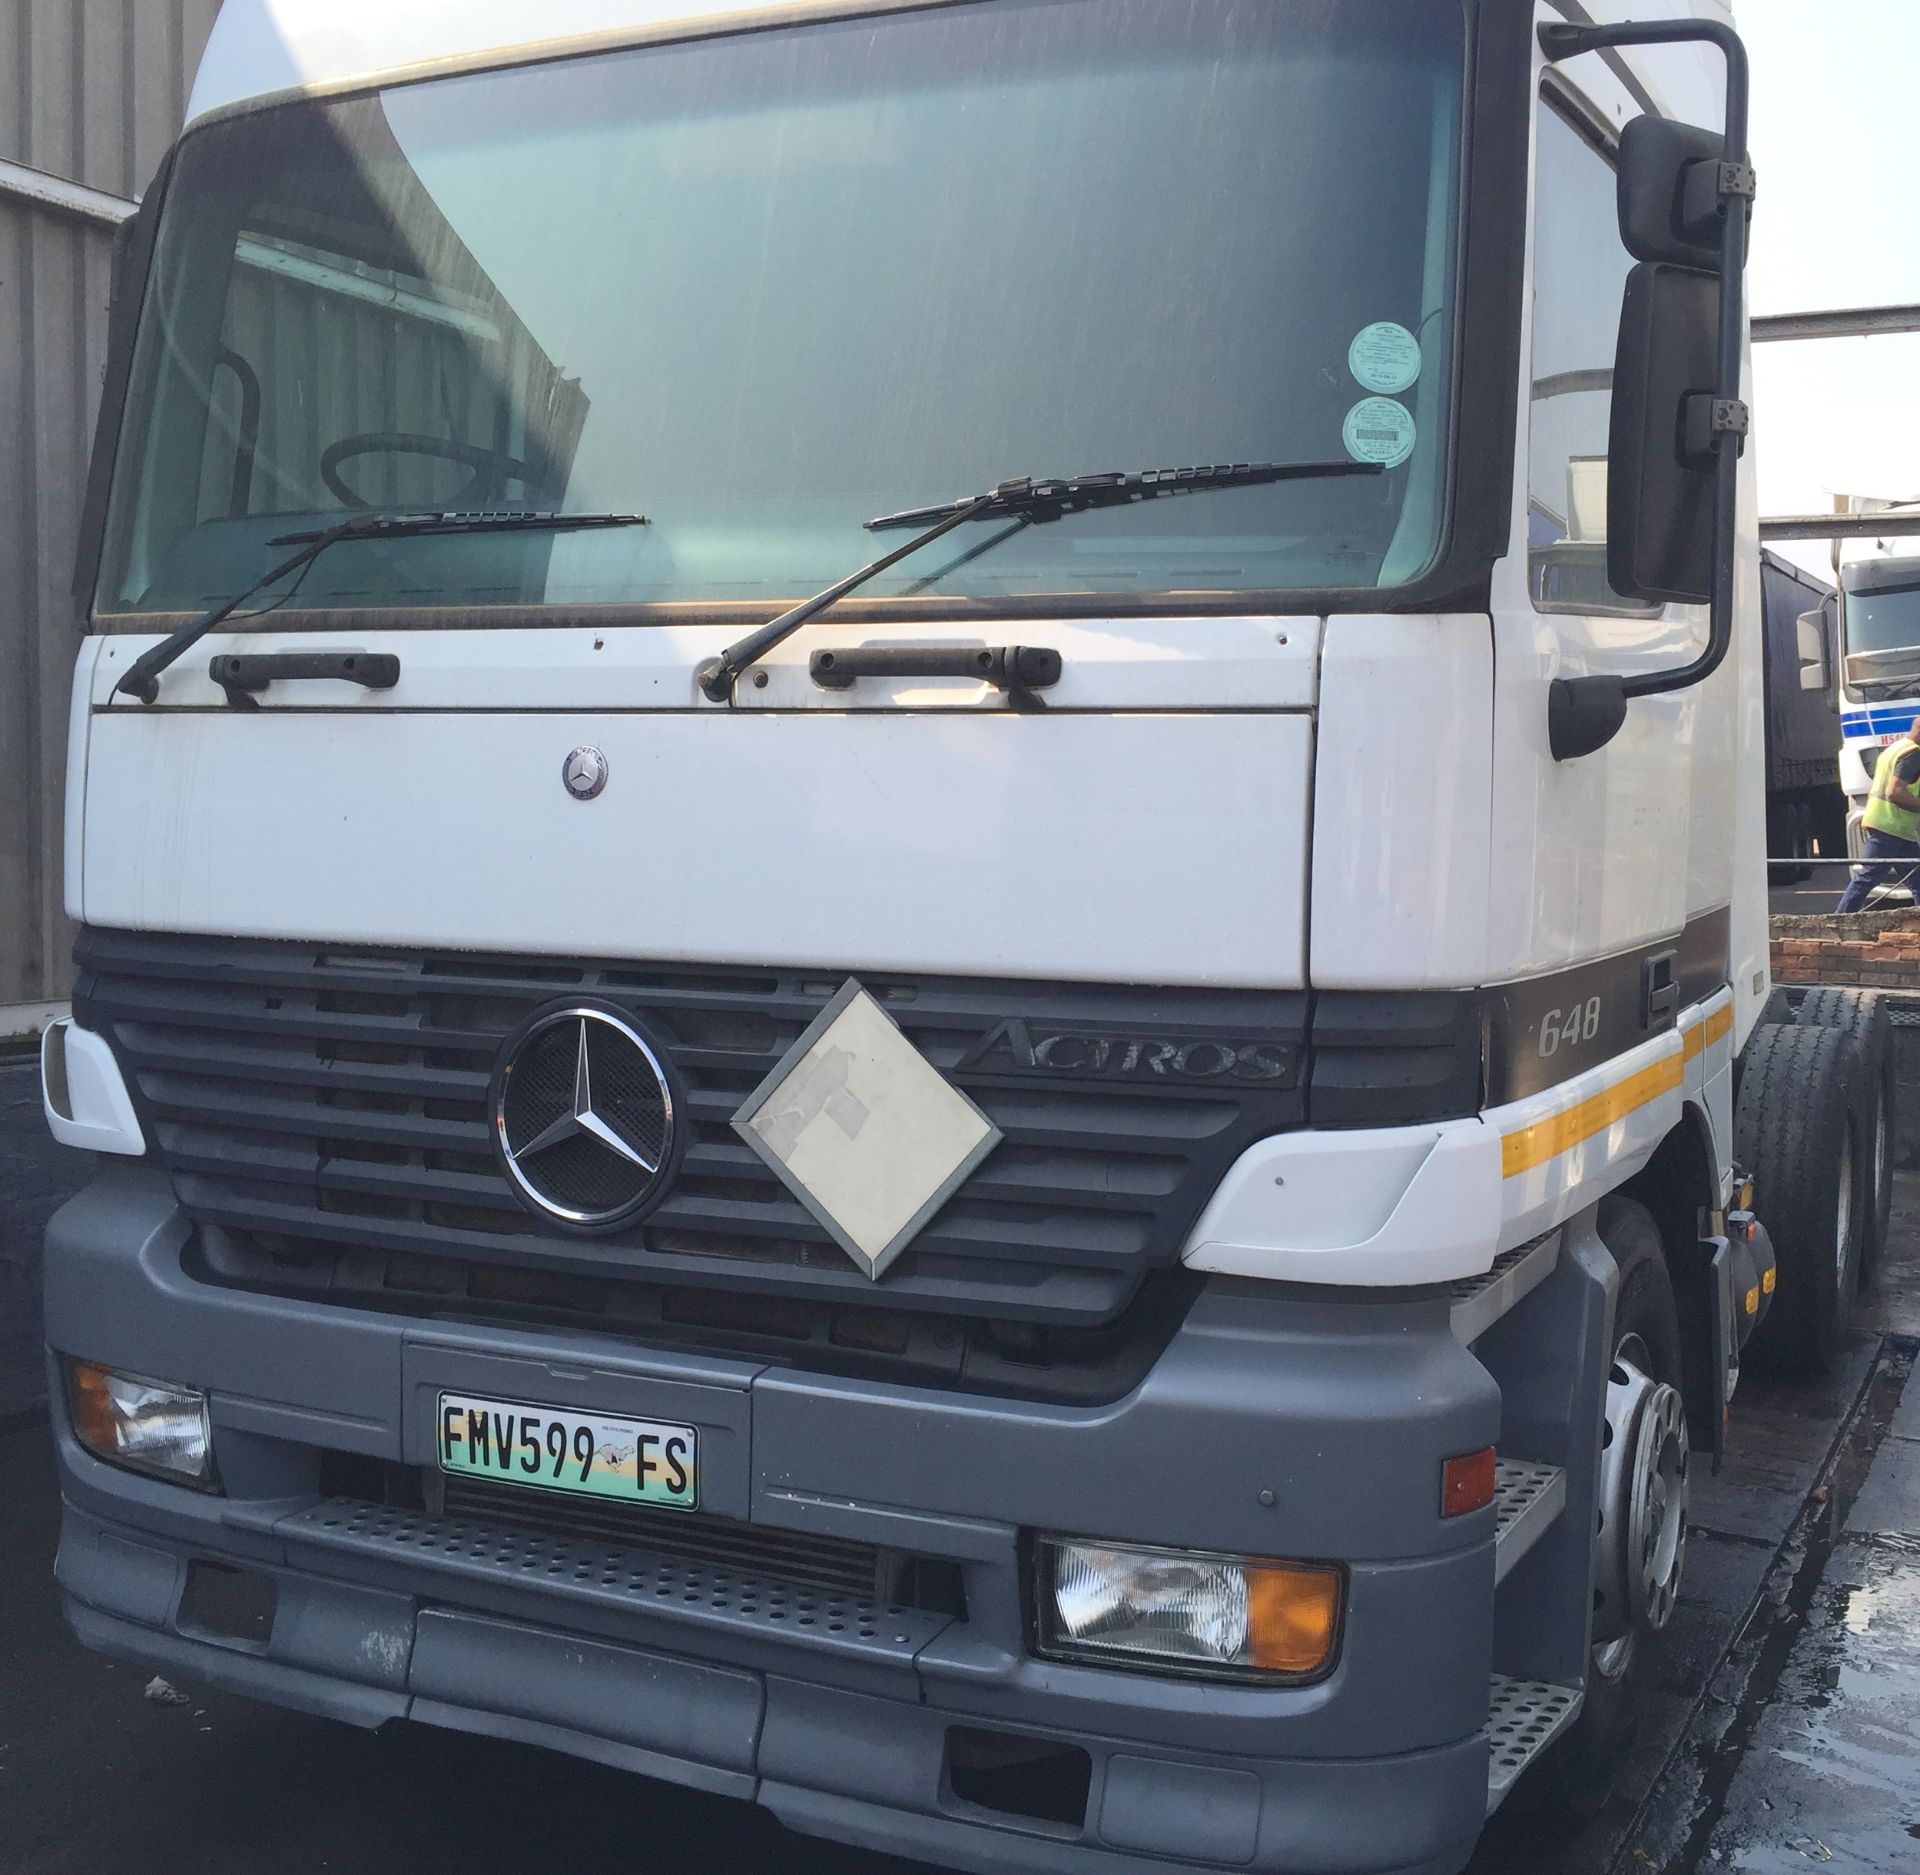 2003 M/BENZ ACTROS 2648 6X4 T/T - REG NO: FMV599FS - (ITEM TO BE SOLD SUBJECT TO CONFIRMATION) - Image 2 of 10